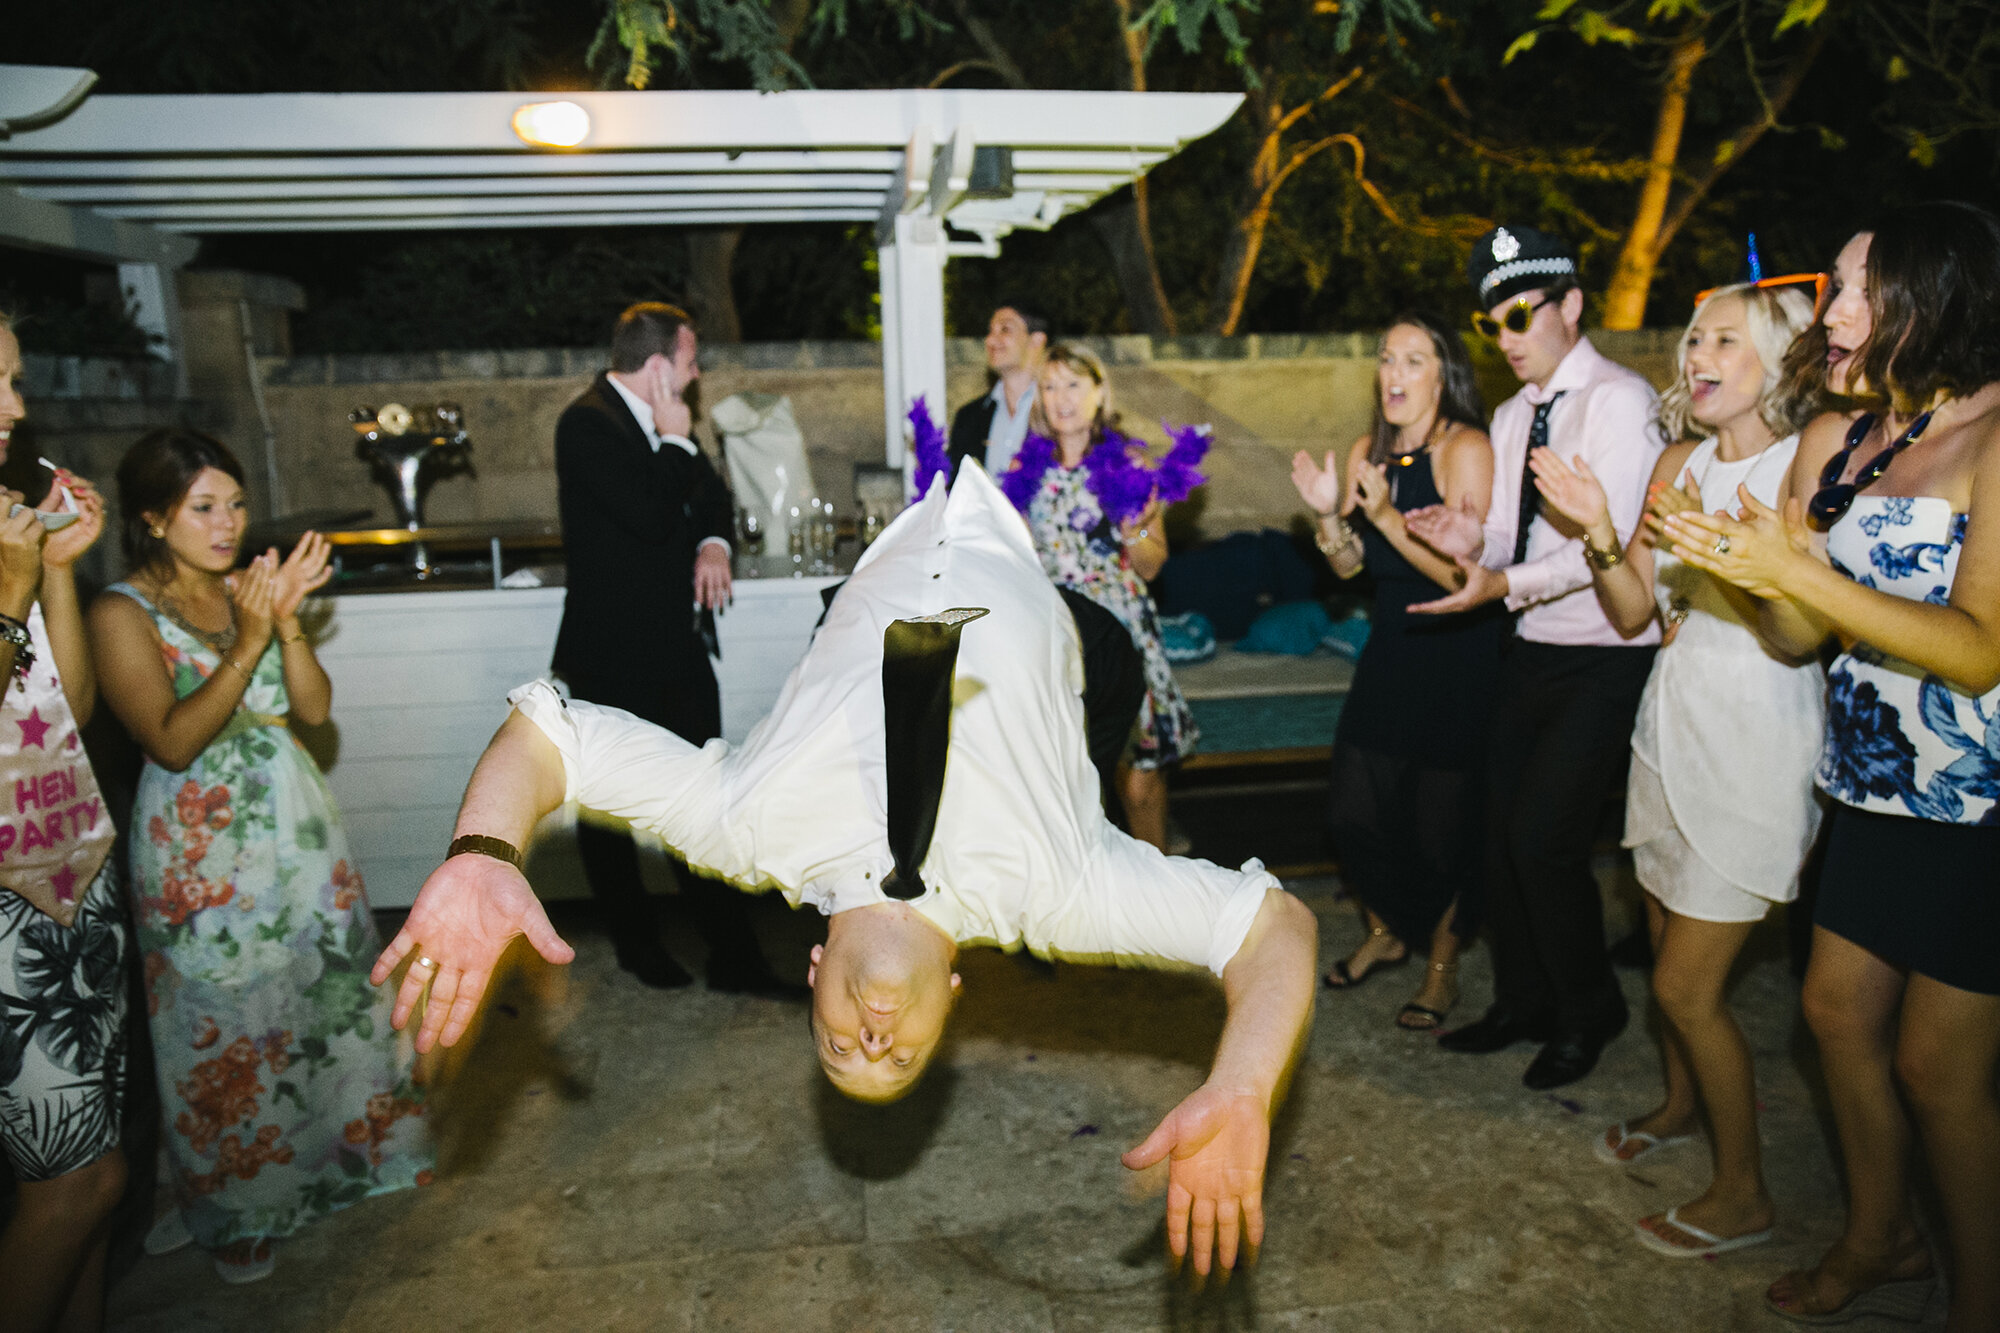 Catching the dancefloor action | Dunsborough wedding photography | Wise Winery